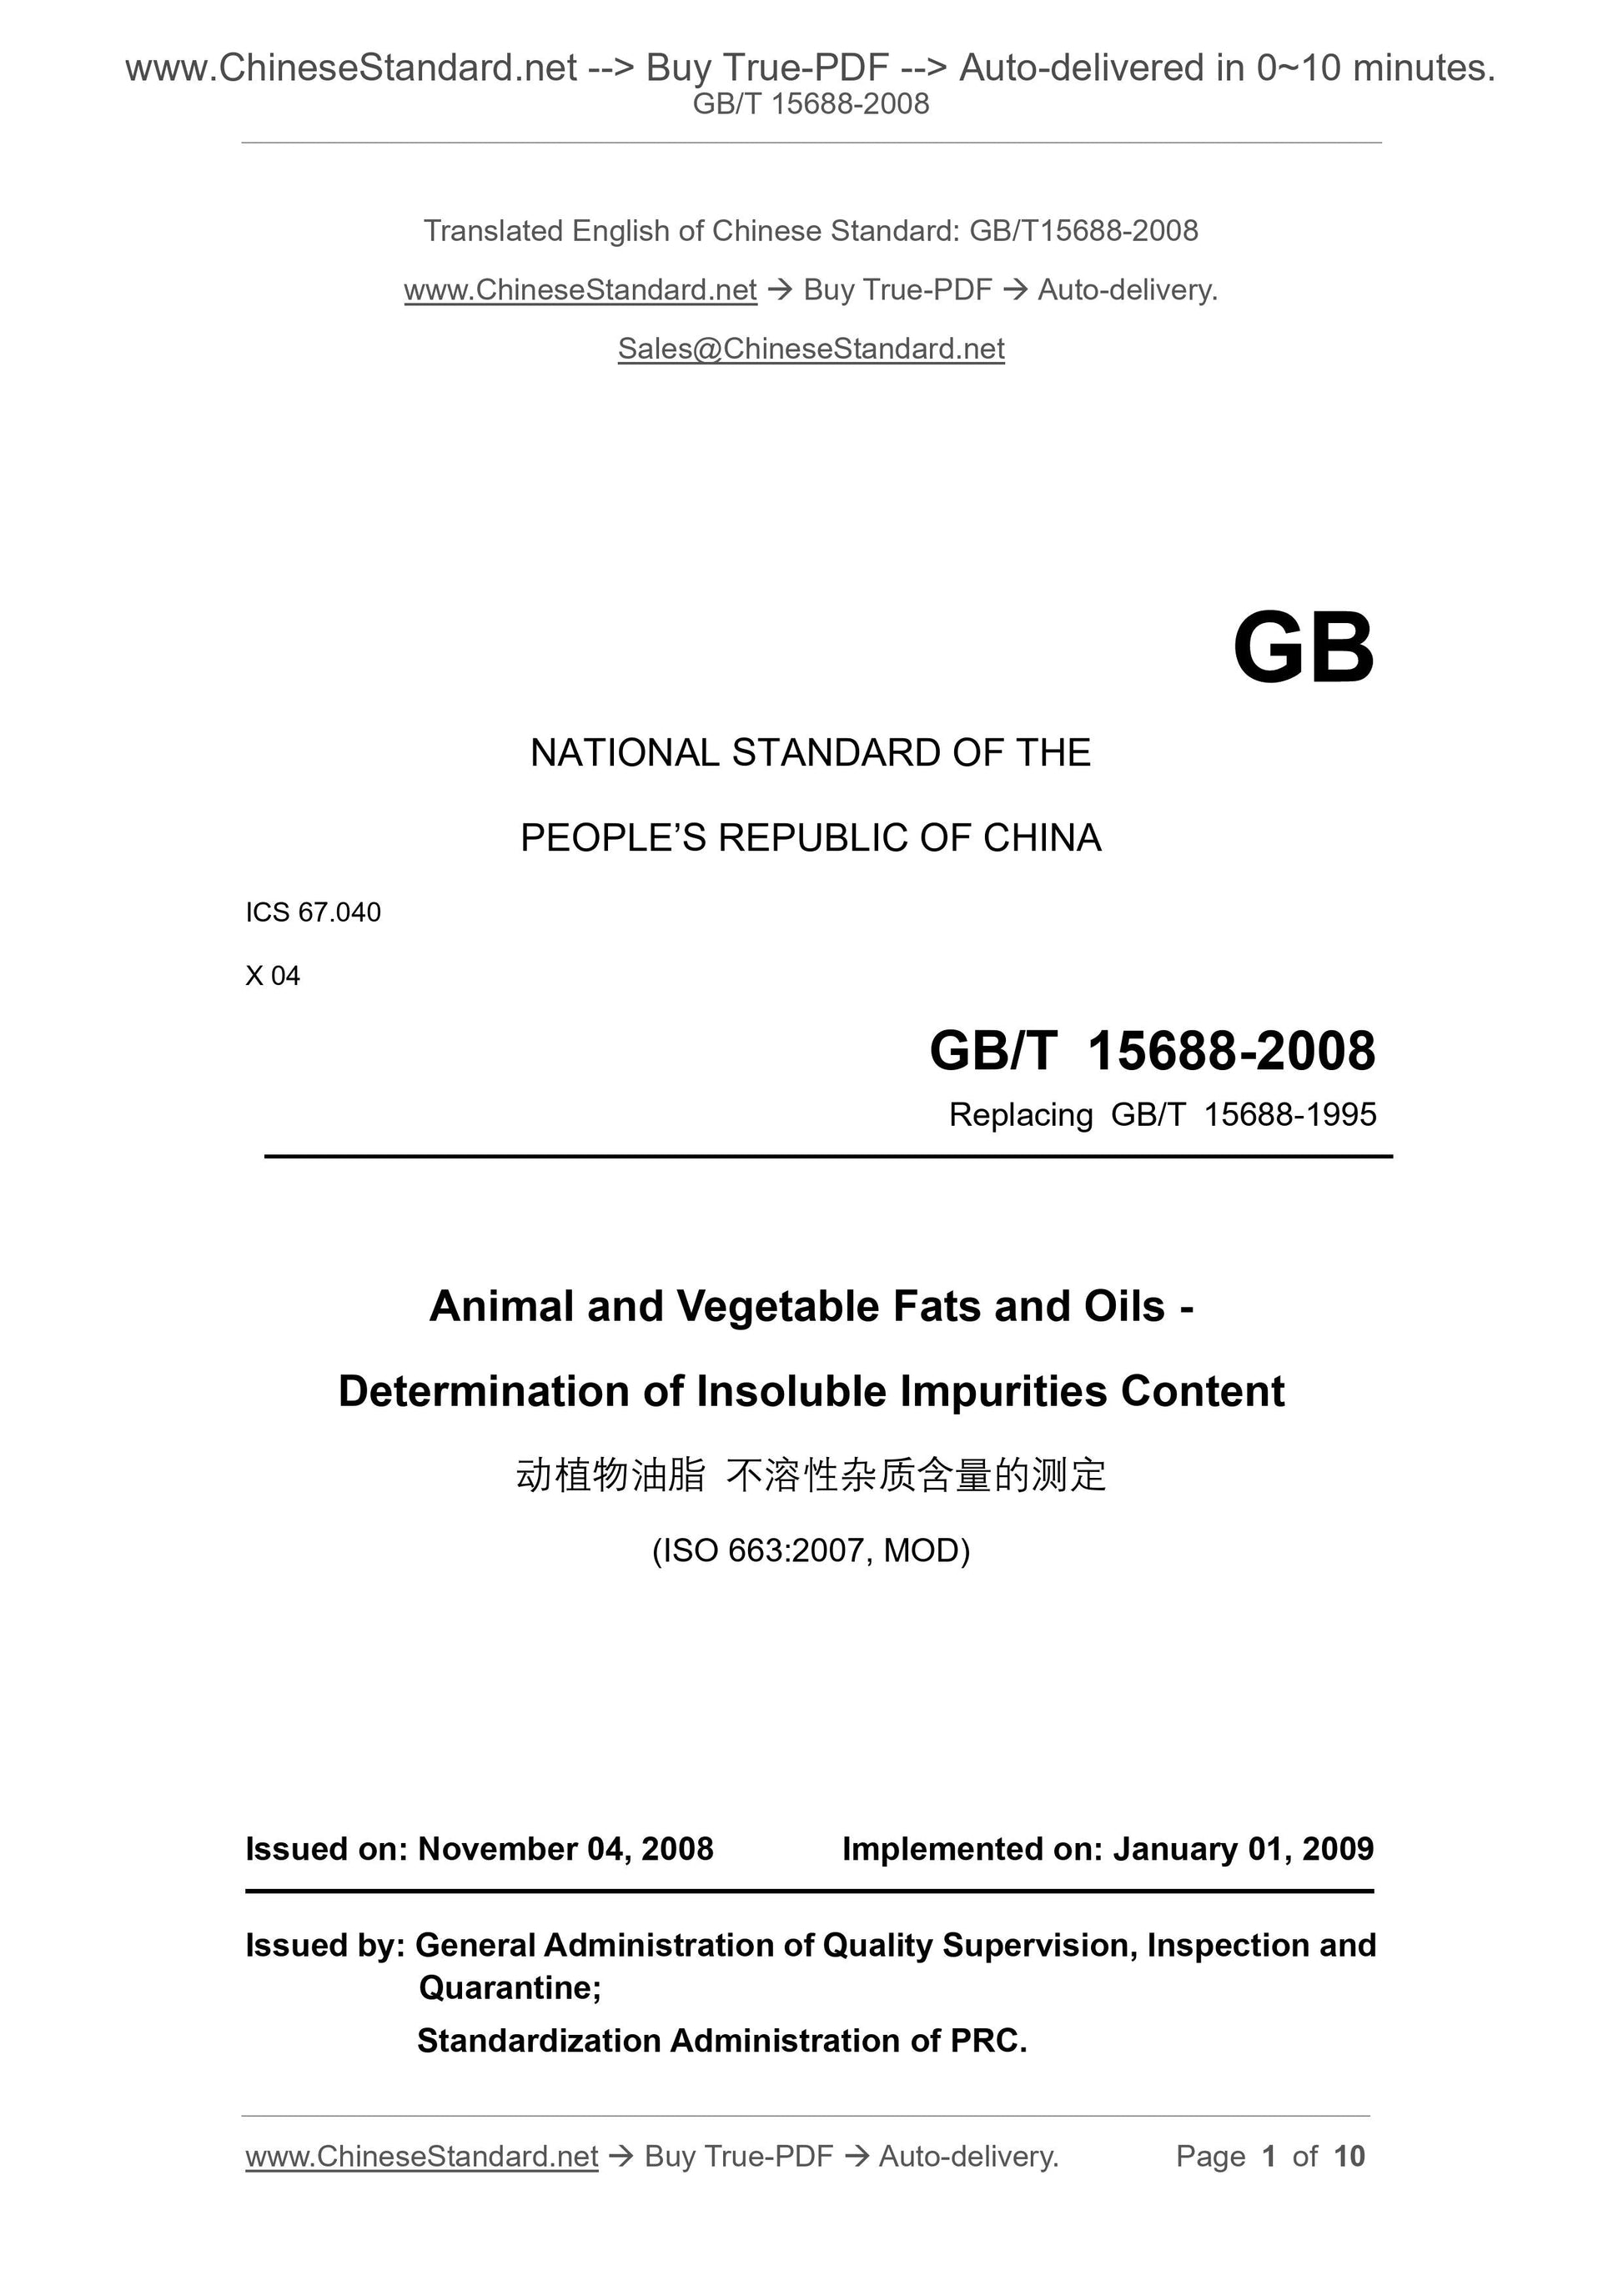 GB/T 15688-2008 Page 1